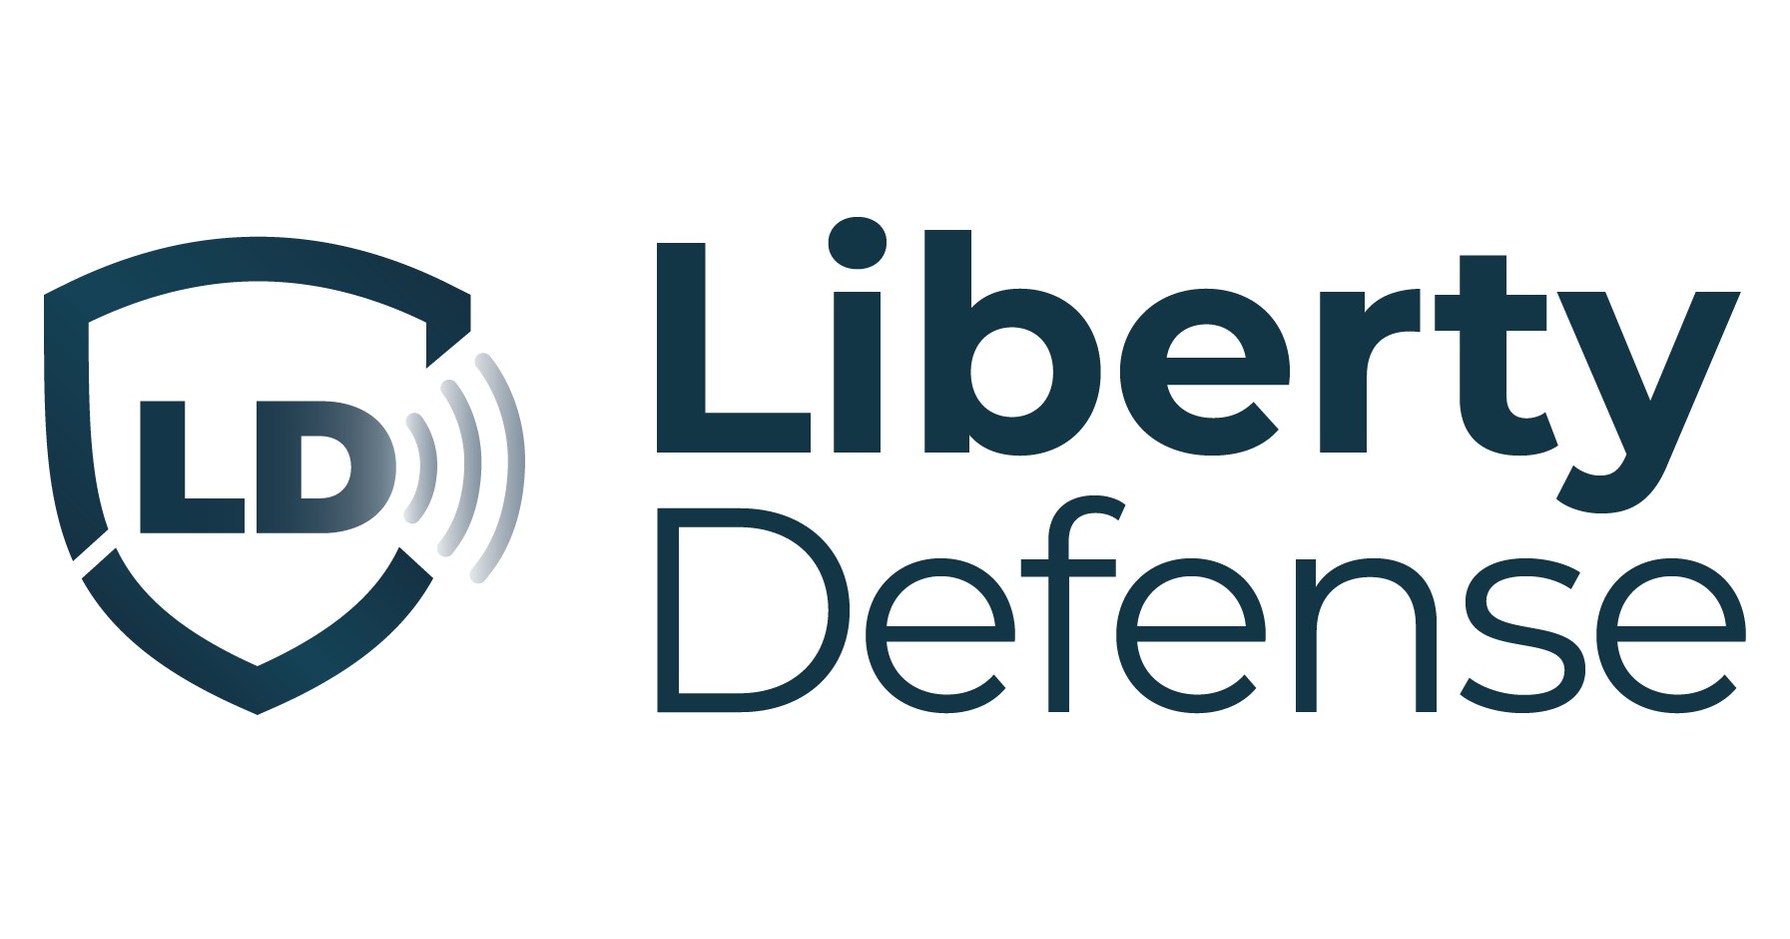 Liberty to Attend Industry Conferences to Showcase HEXWAVE Technology